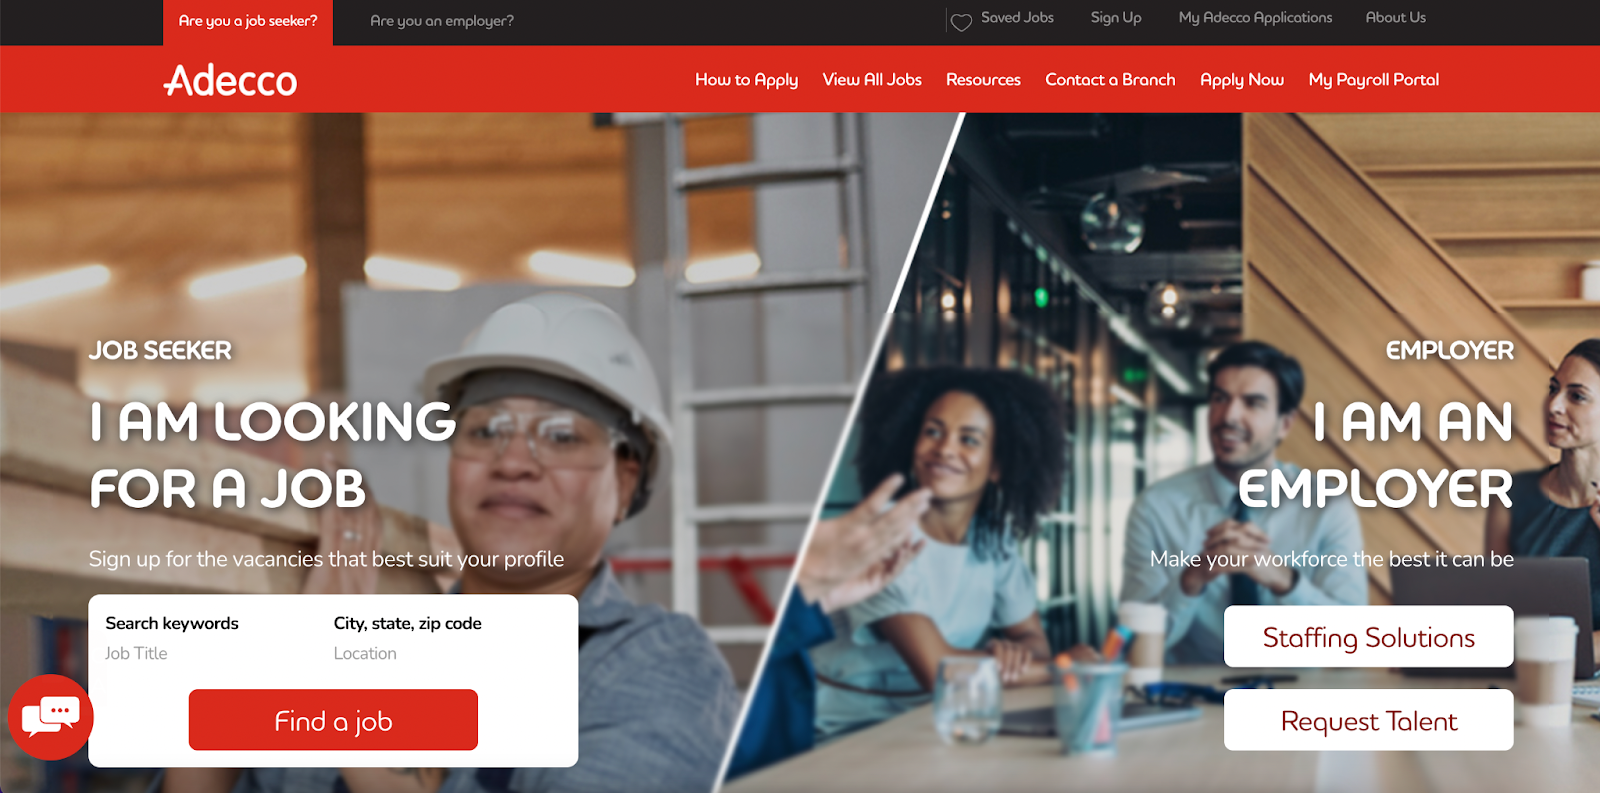 homepage for the recruiting website adecco